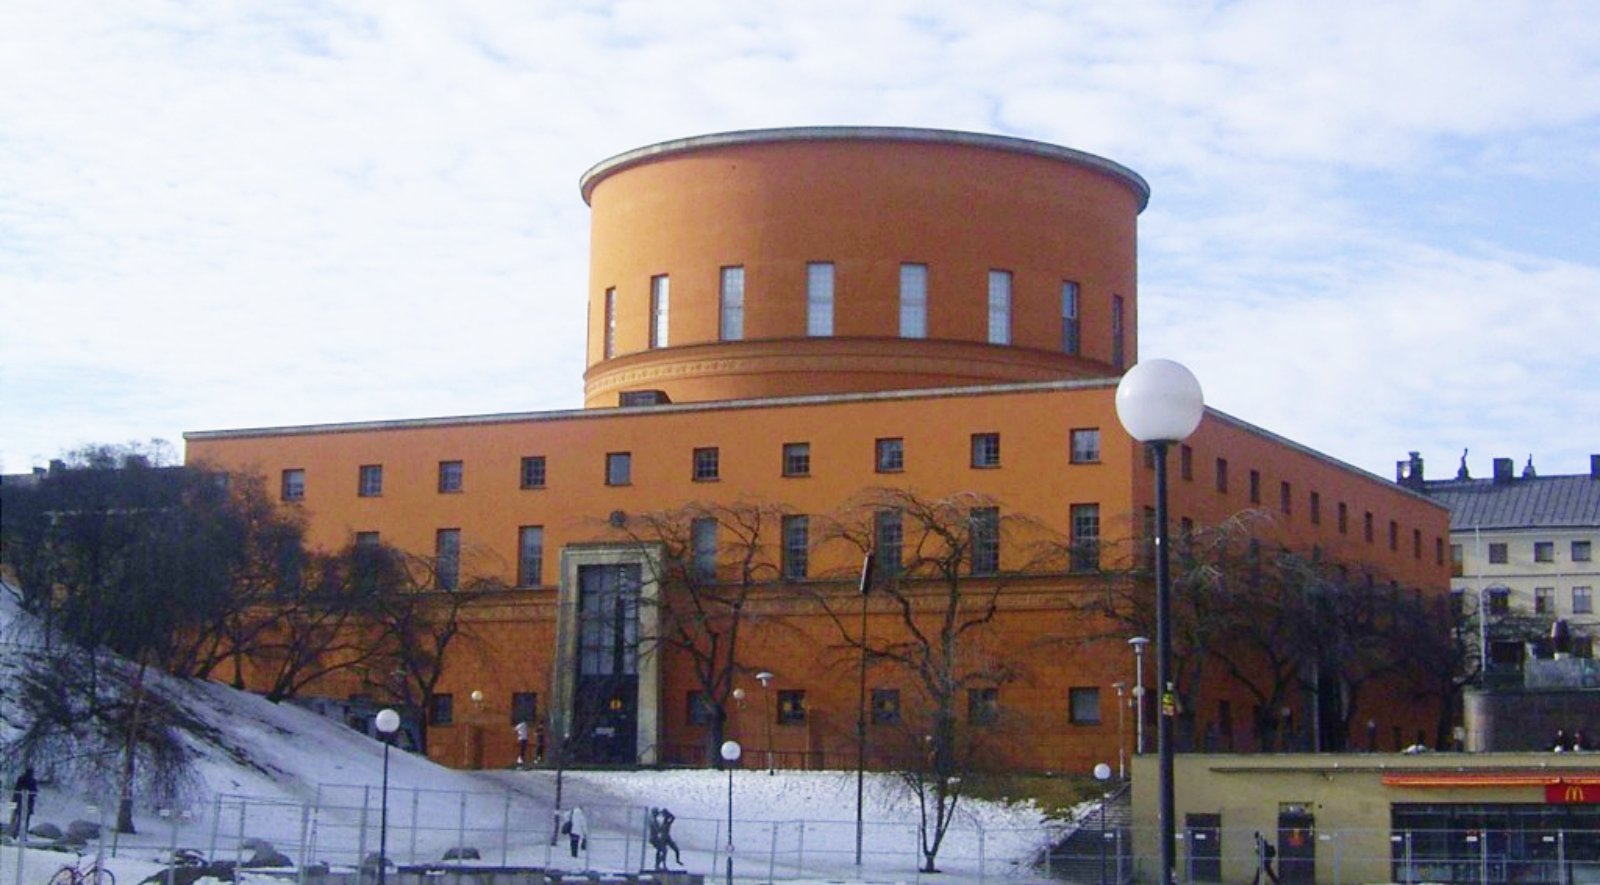 Stockholm City Library